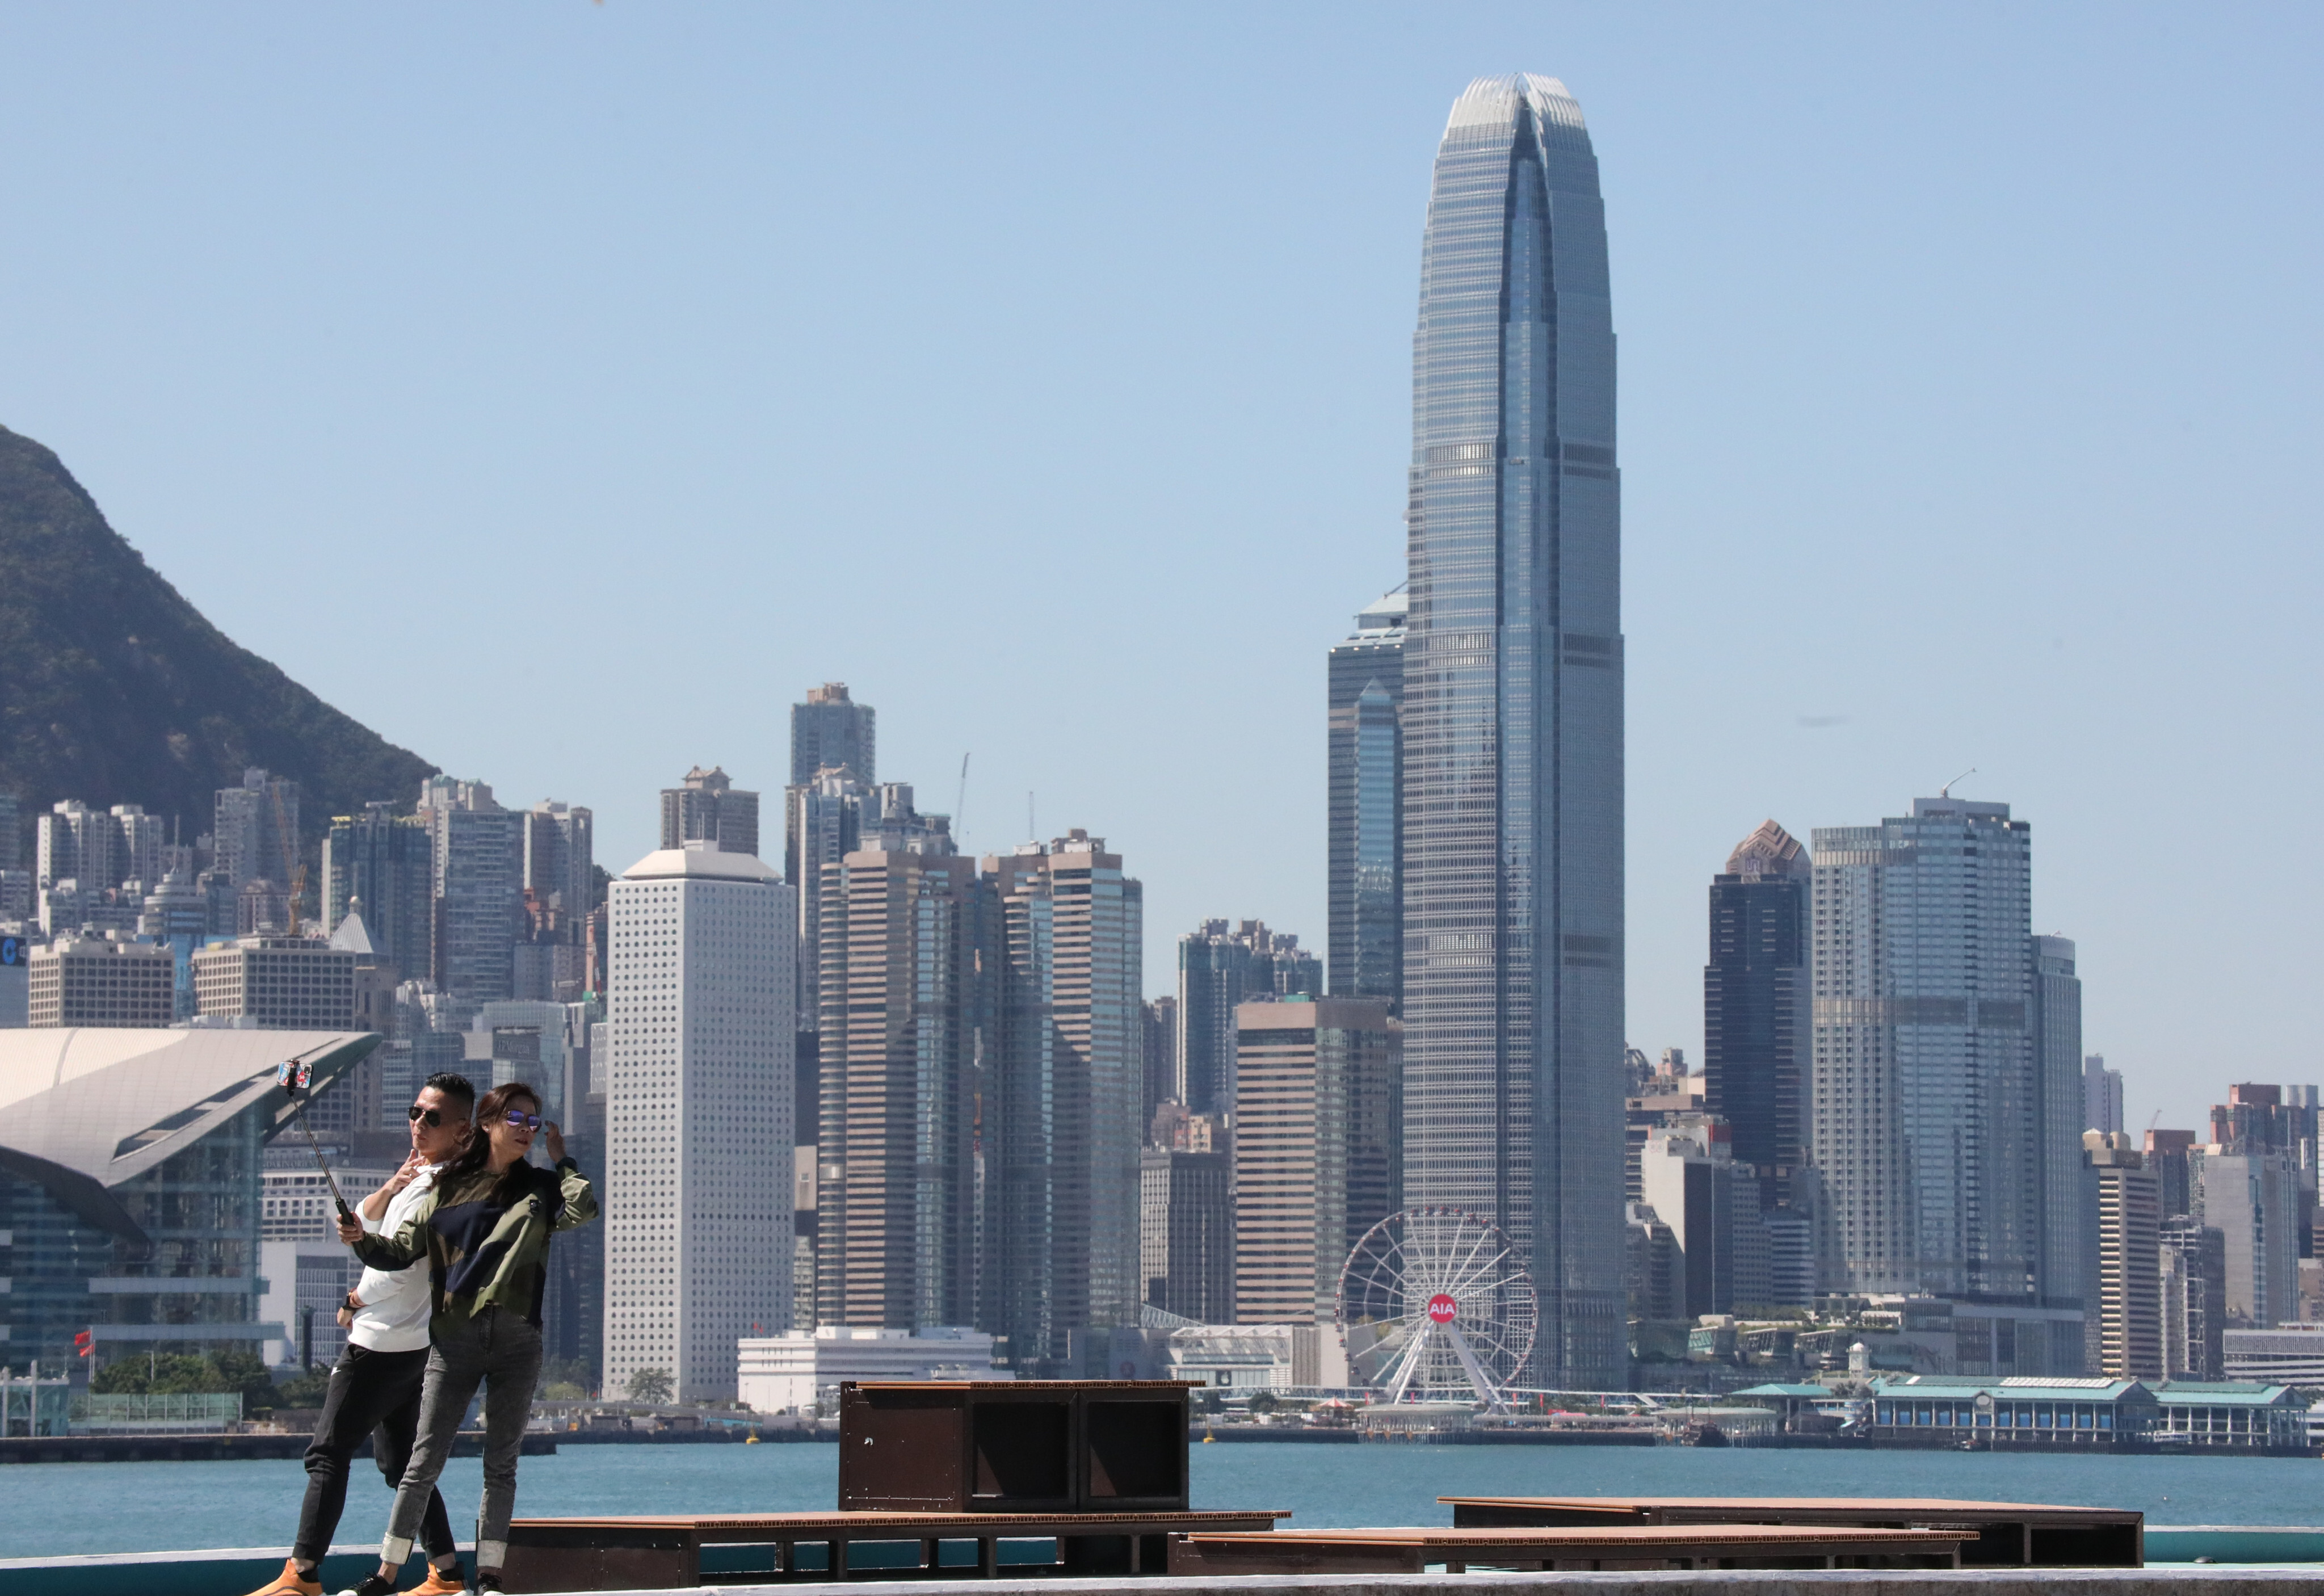 Hong Kong’s Central business district. The markets in Asia on Monday took their cues from the US, where stocks saw heavy sell-offs on Friday because of the Omicron variant. Photo: Felix Wong